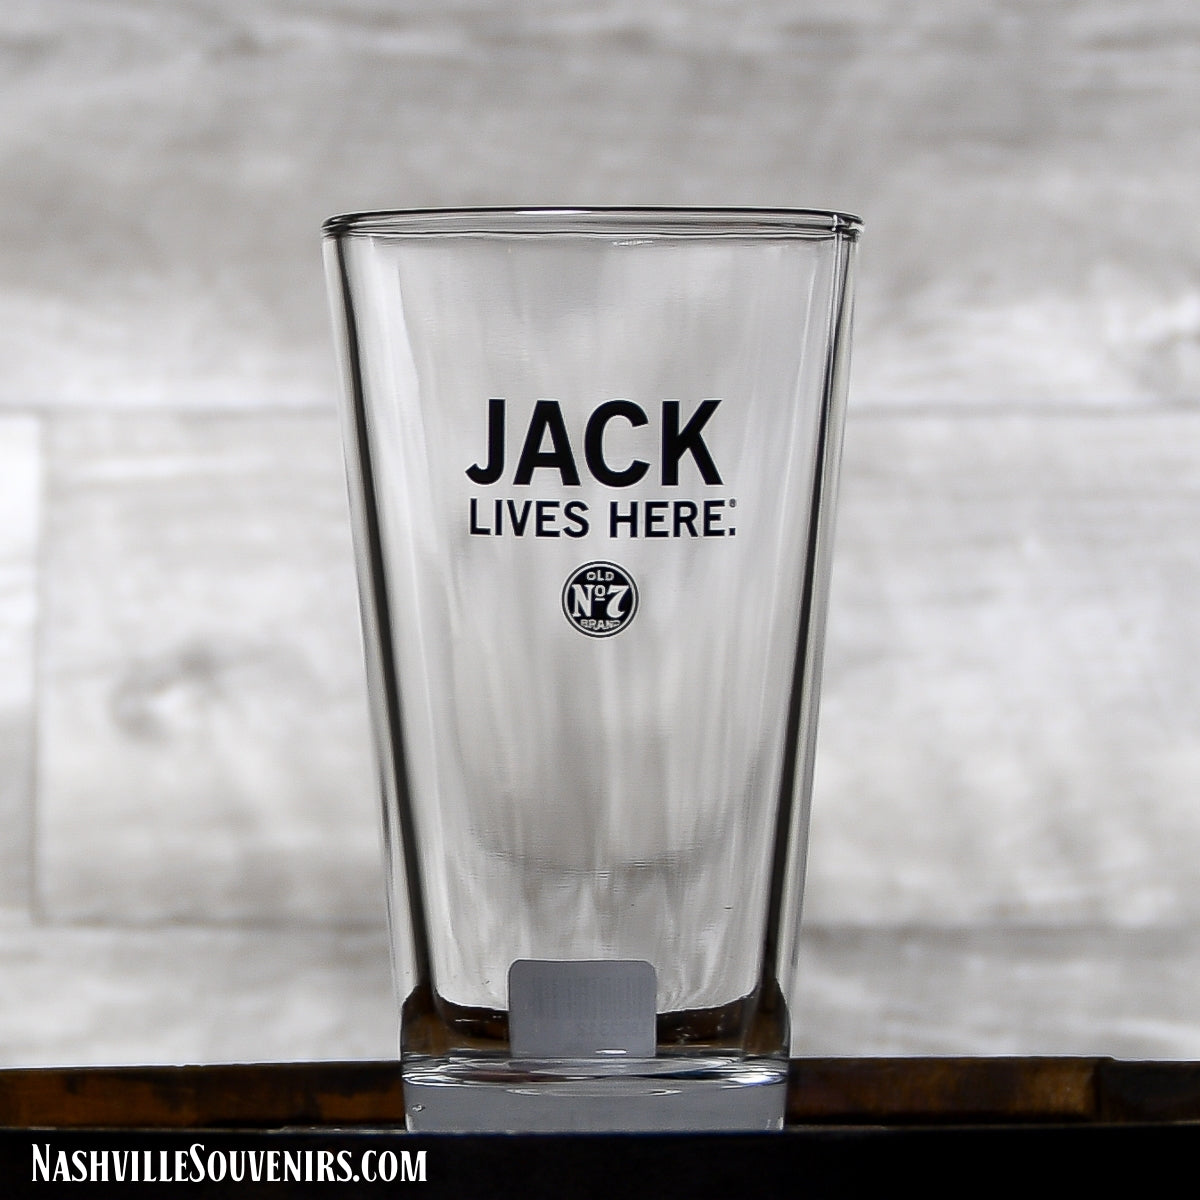 Officially licensed Jack Daniels Jack Lives Here Mixing Glass. FREE SHIPPING on all US orders over $75!